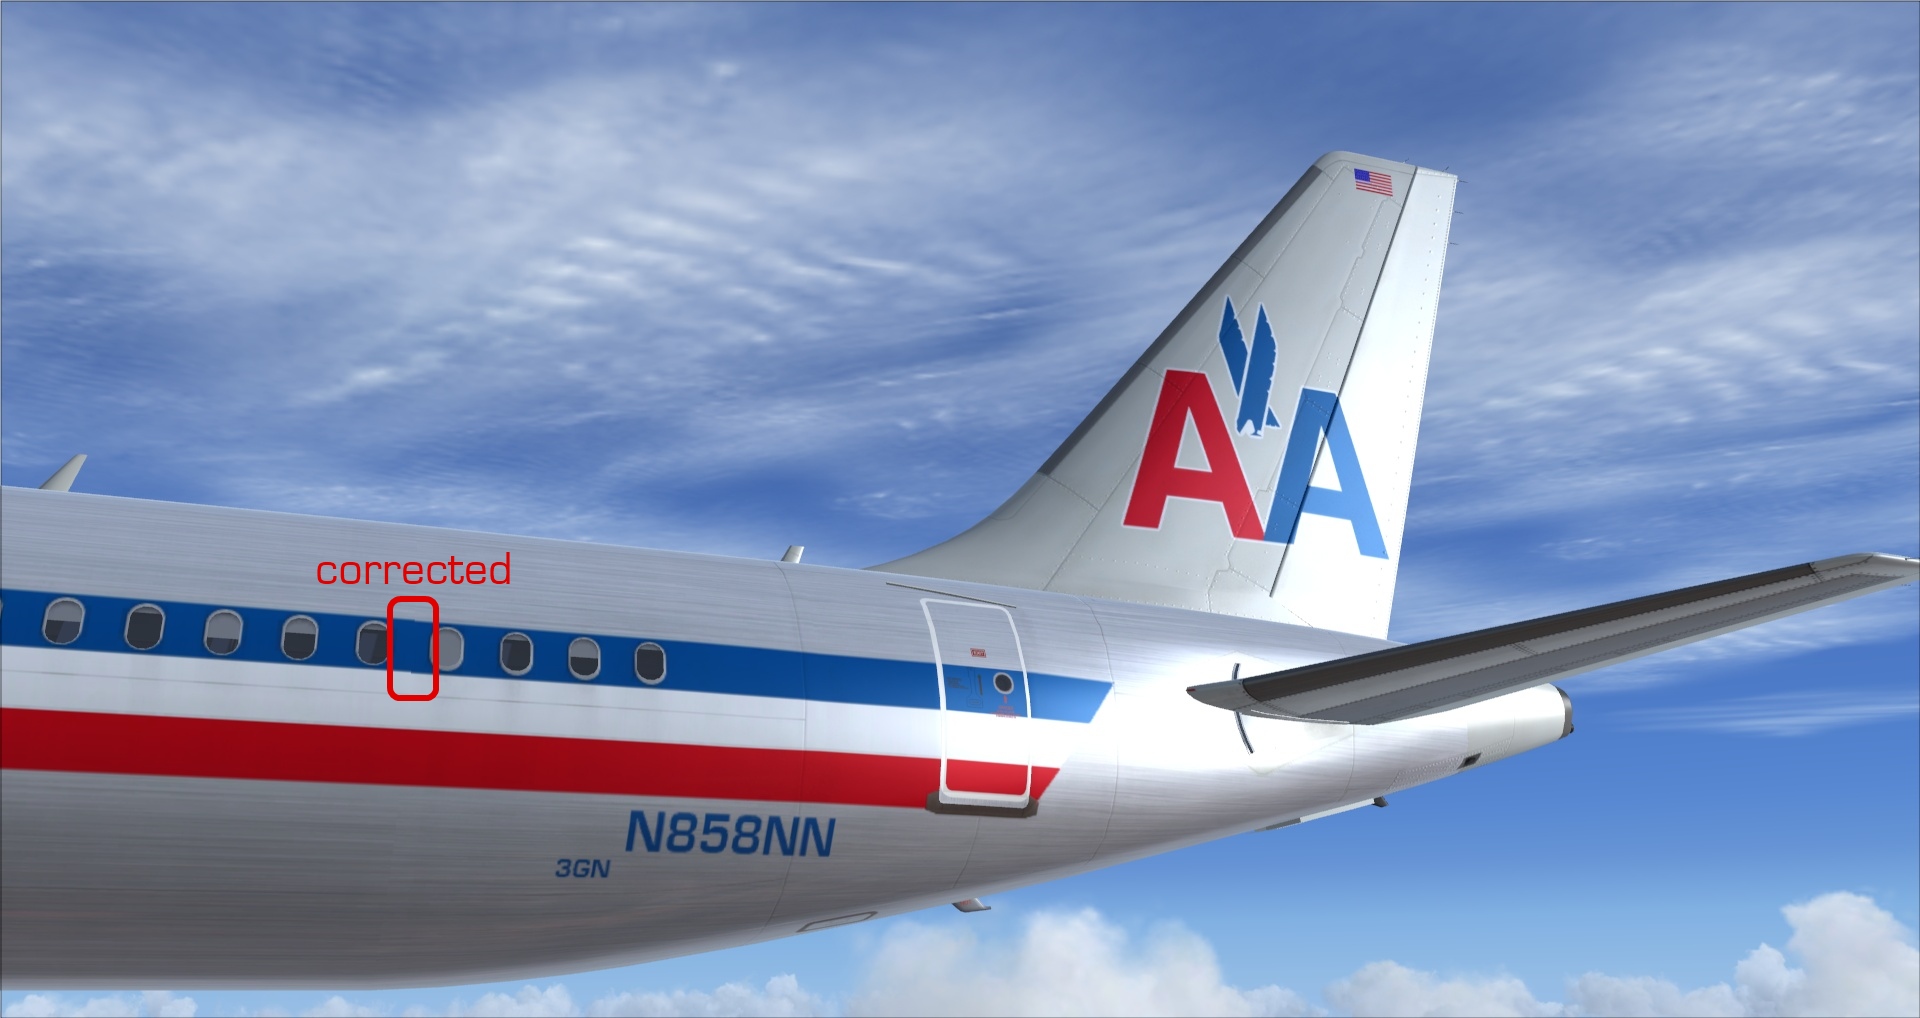 More information about "American Airlines A321 IAE N858NN"